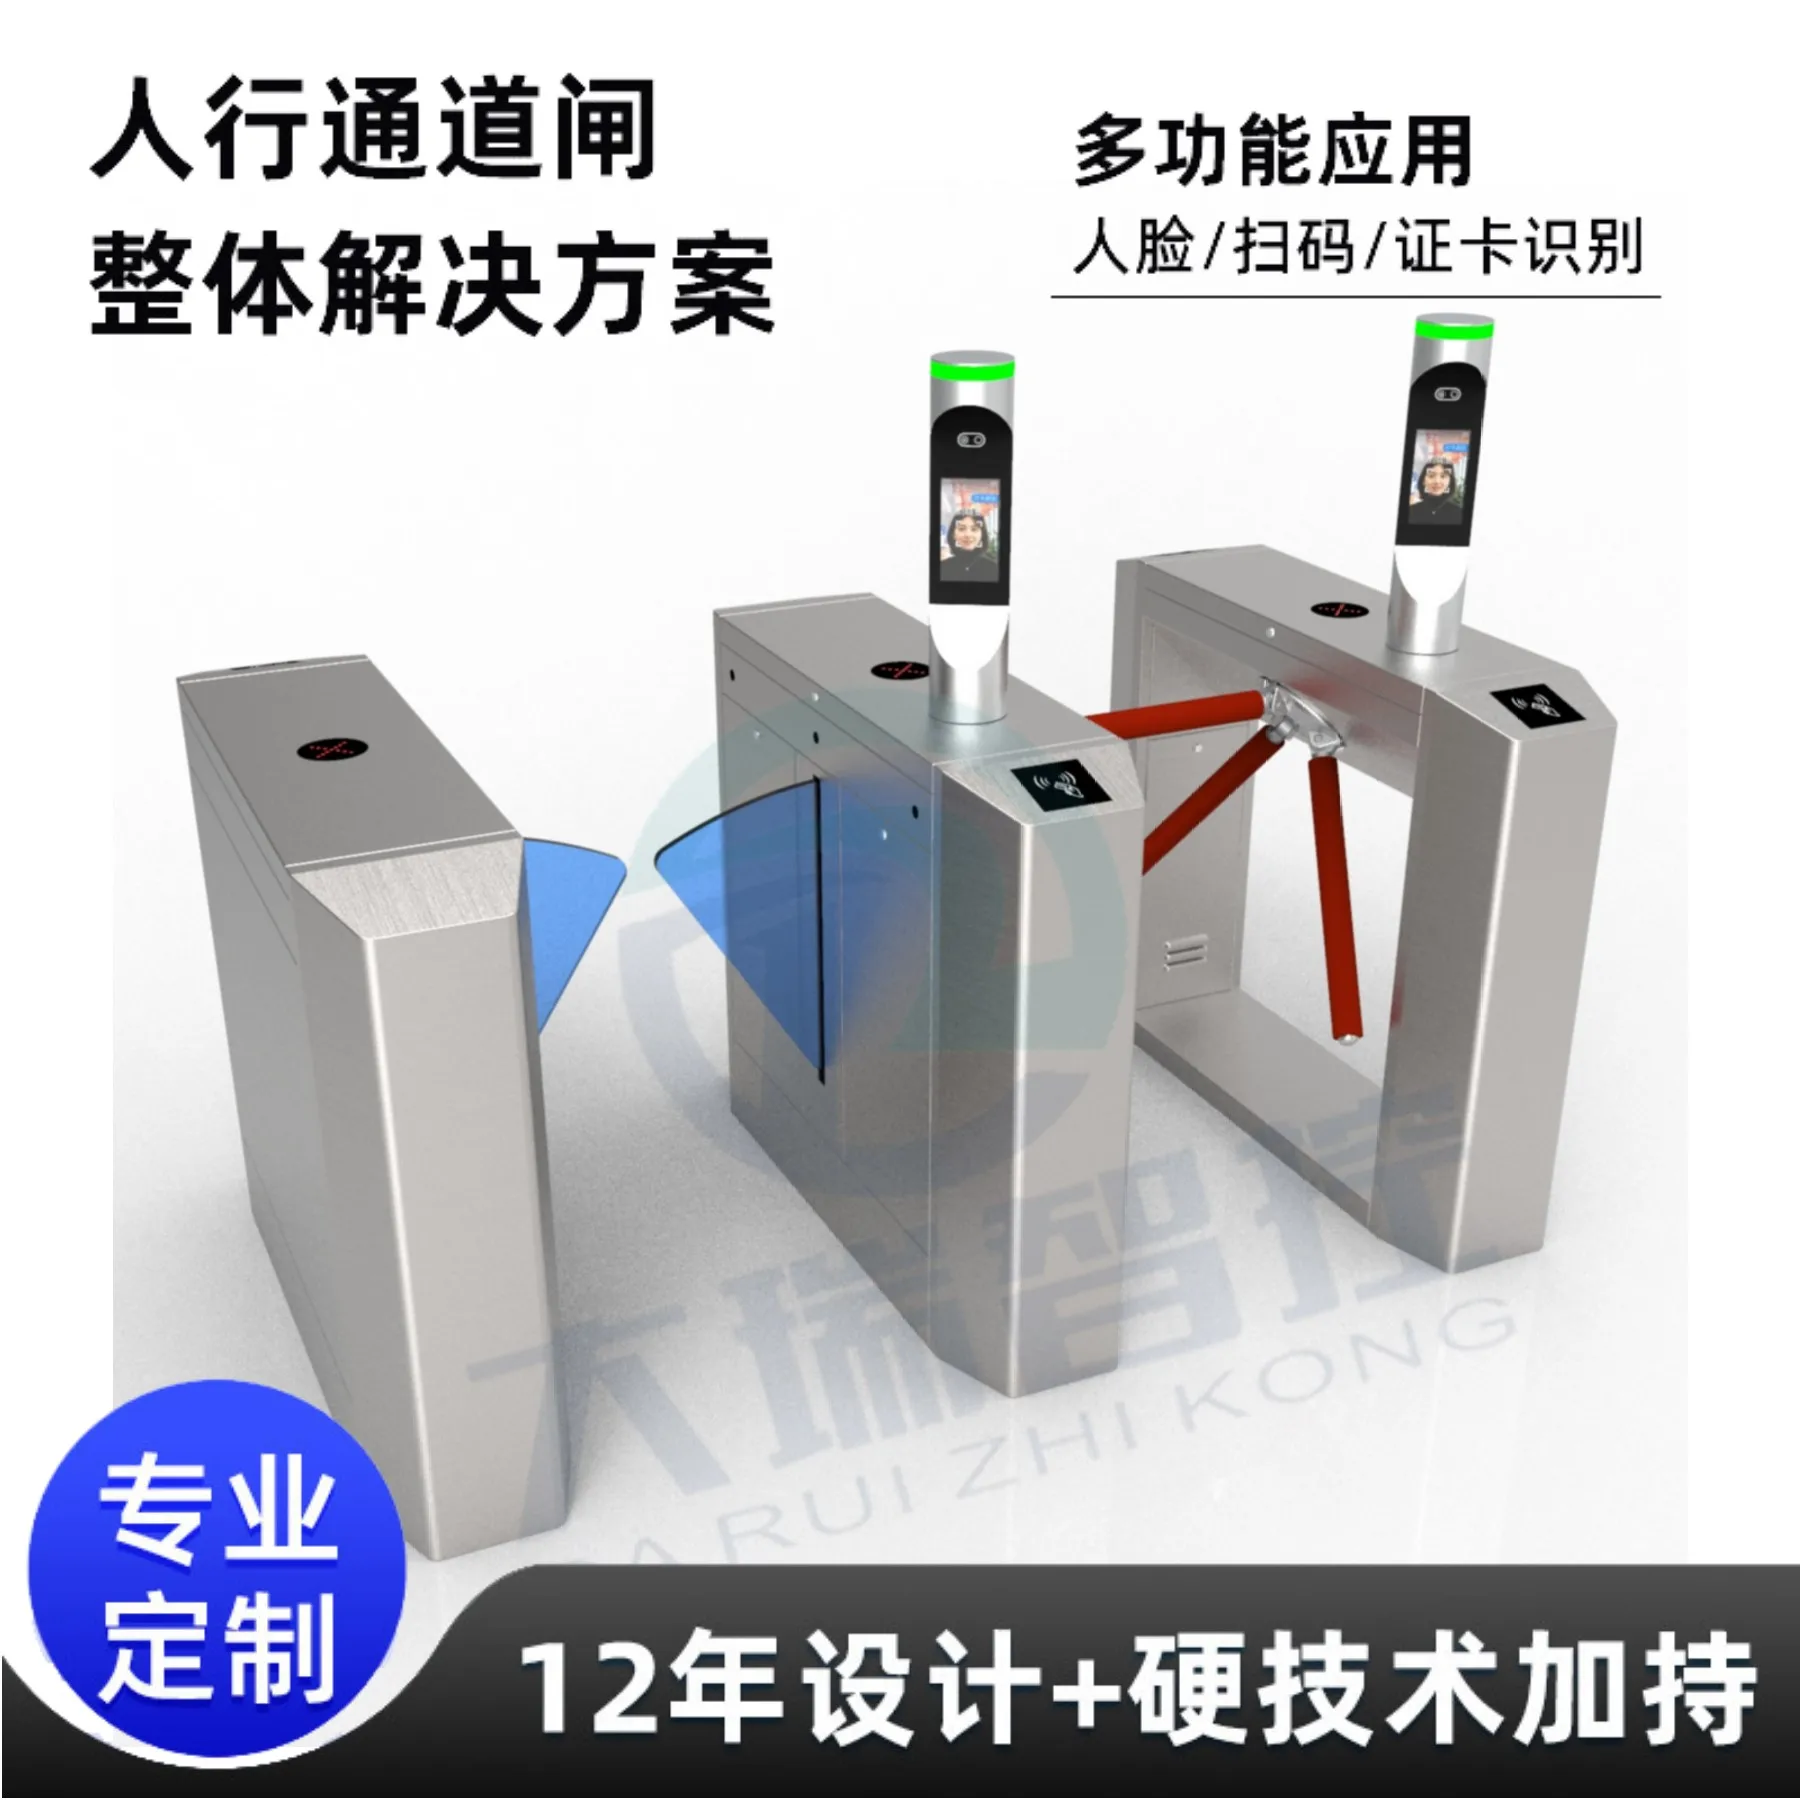 

Access Control Tripod Turnstile Barrier Gate for Construction of Government Agencies High Safety Automatic speed gate